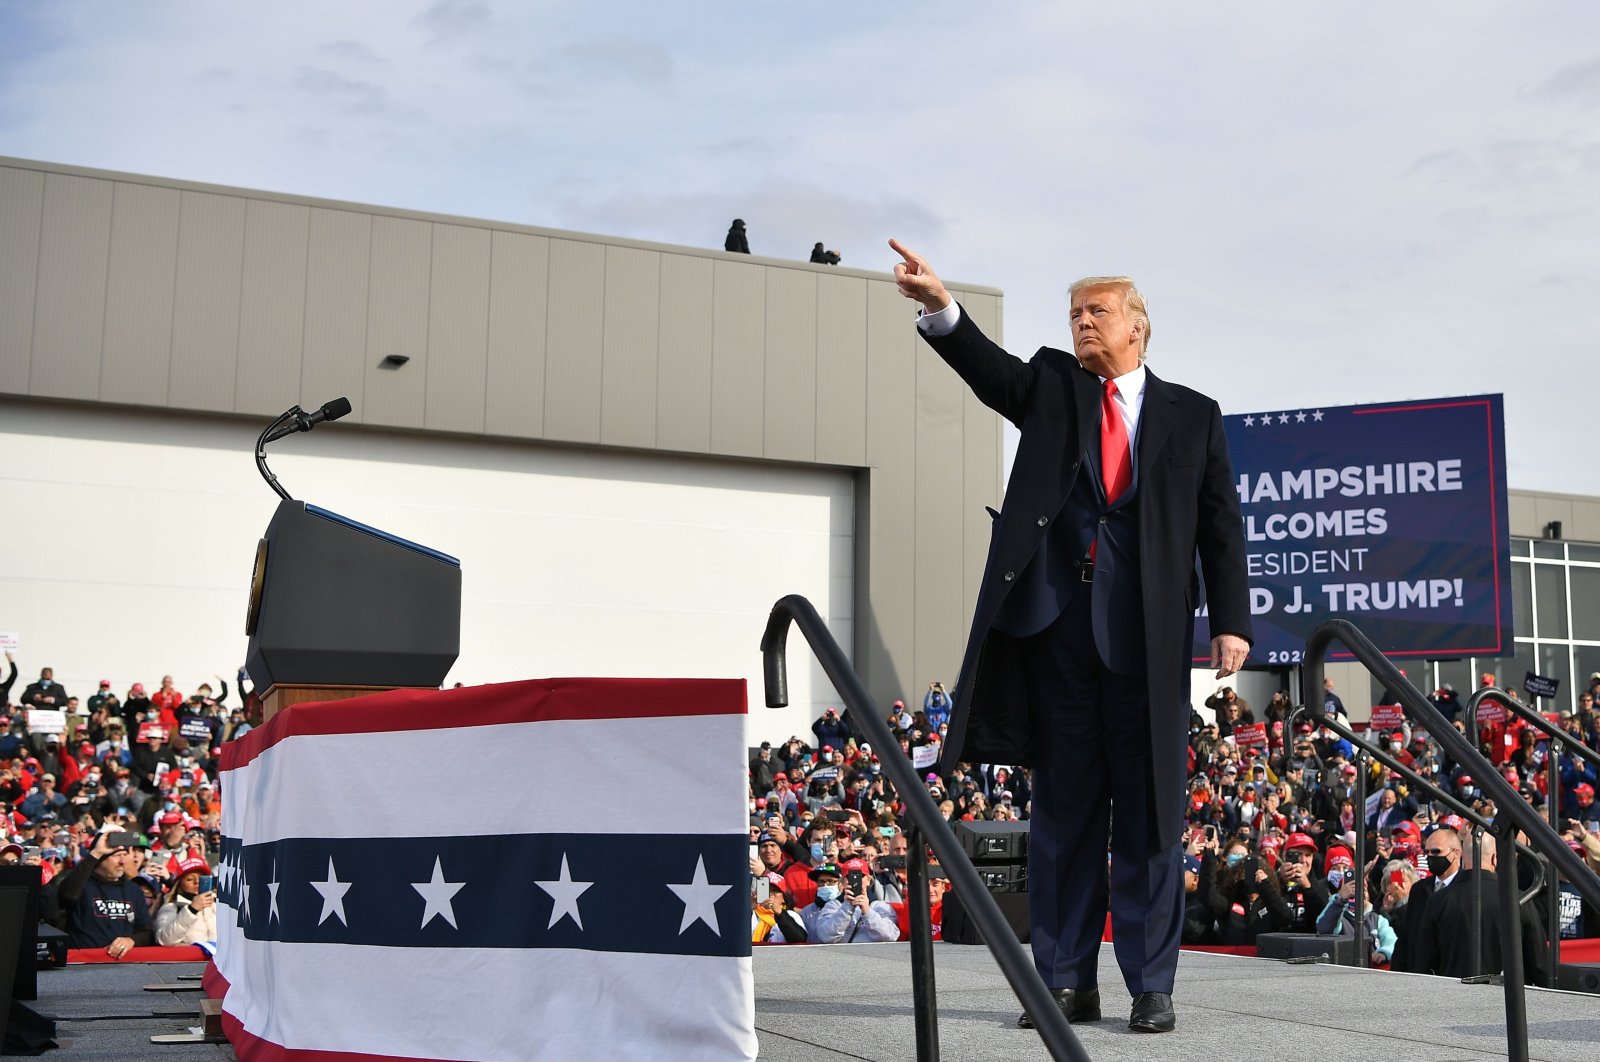 U.S. President Donald Trump waves as he departs, after speaking during a campaign rally at Manchester-Boston Regional Airport in Londonderry, New Hampshire, Oct. 25, 2020. (AFP Photo)